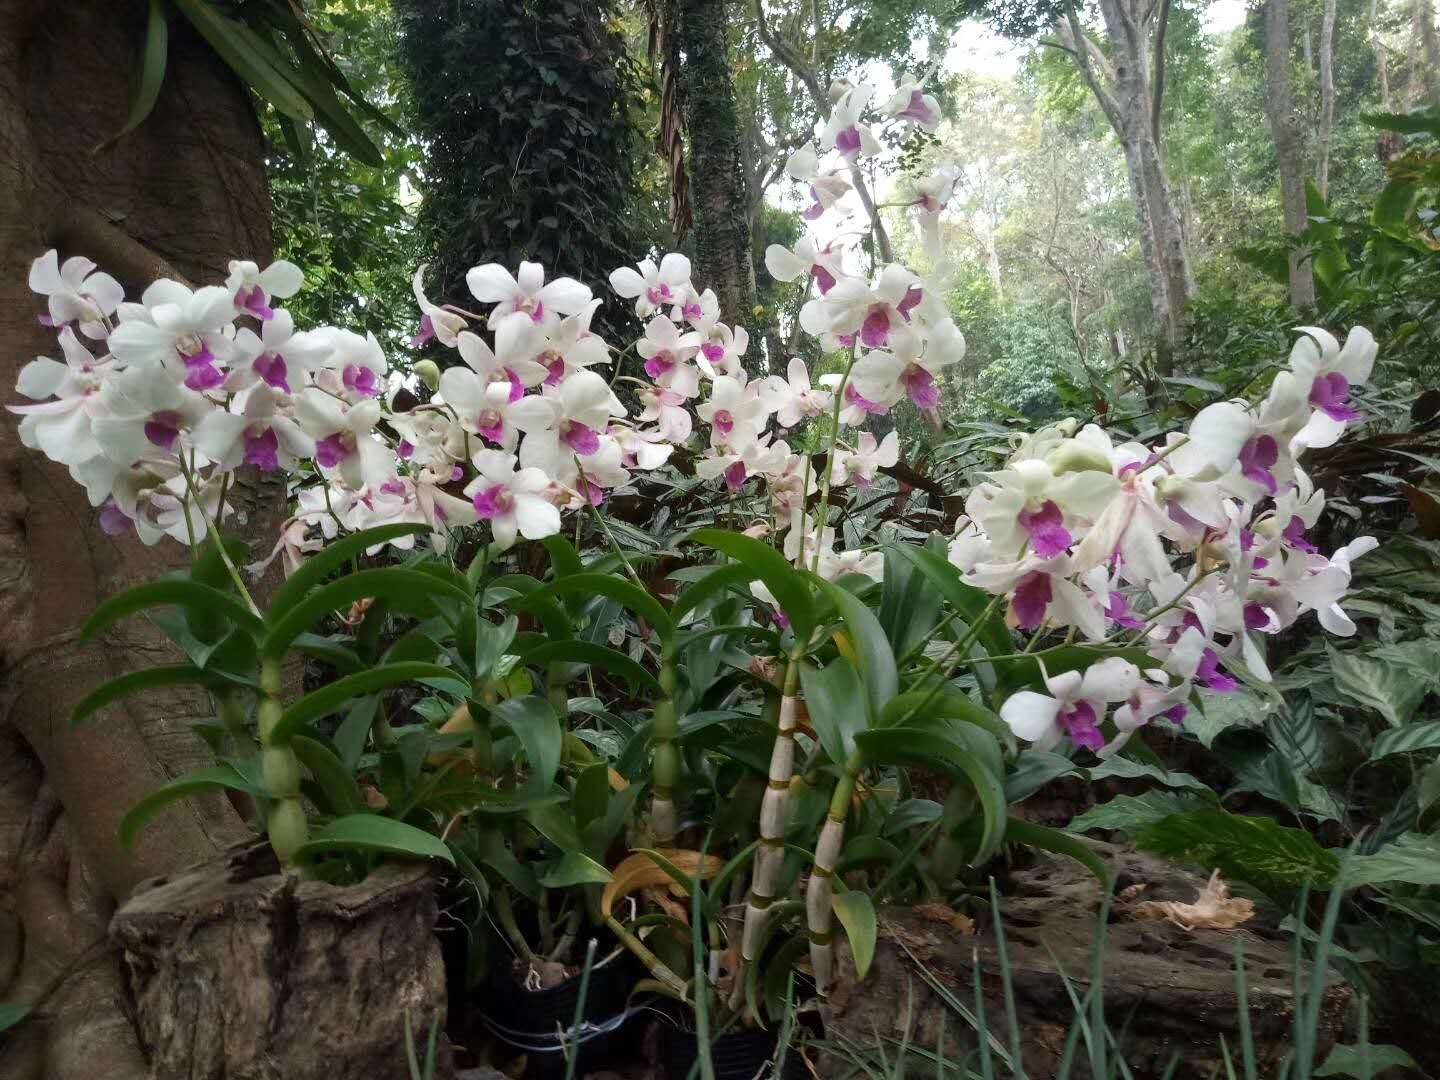 The orchid show 2018 in XTBG